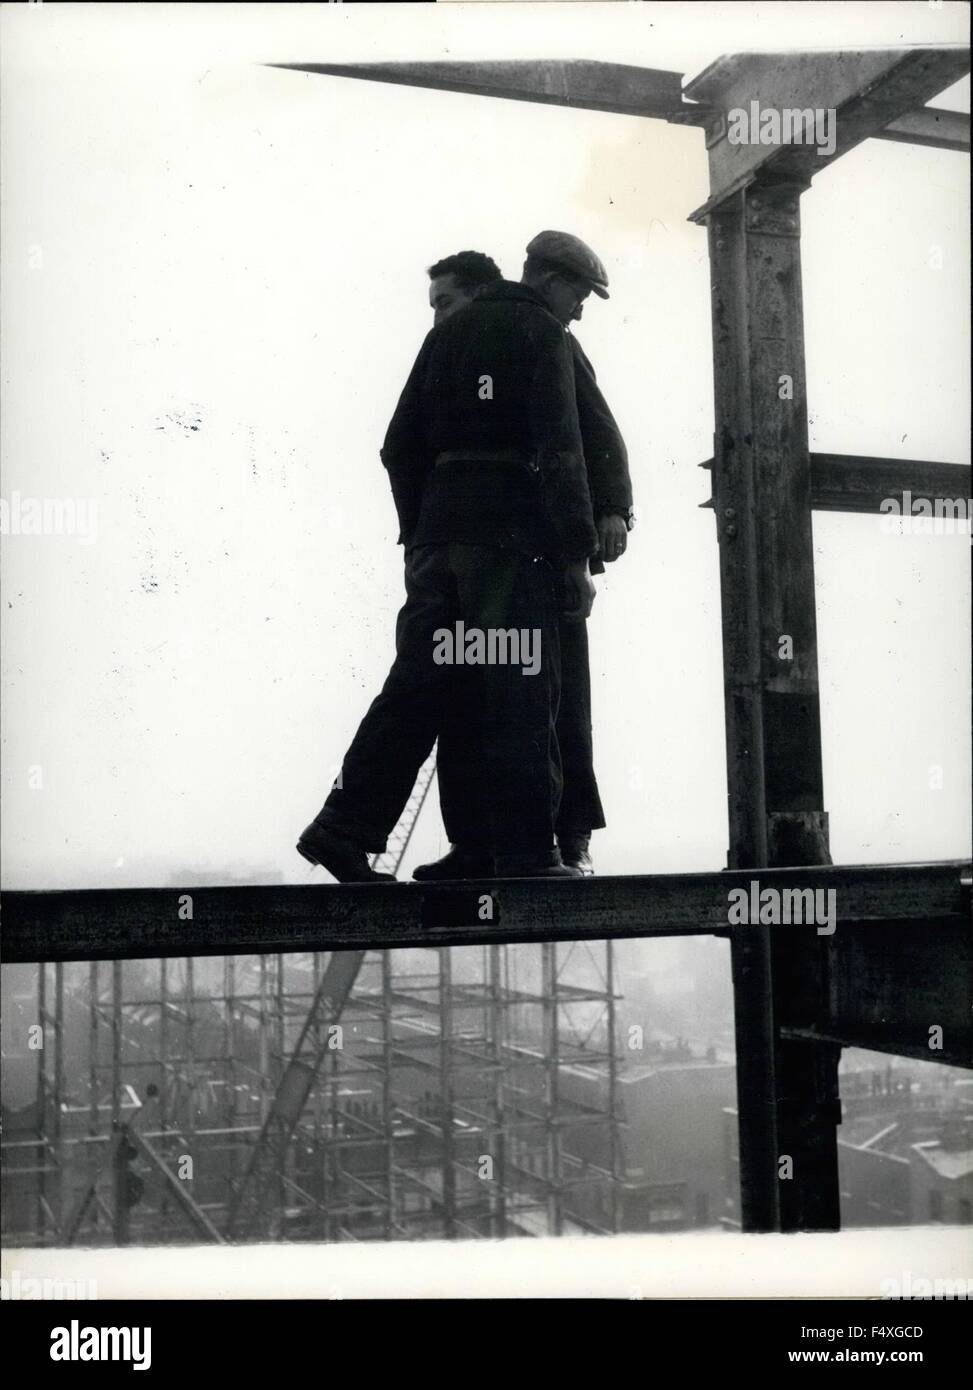 1968 - Positively No Passing - Except For Spidermen!: Probably the most anxious moment for cameramen if not for the steel erectors Jim Roach and Bill Henley, is when they have to pass such other out on the four-inch girder. There's a drill for this, rather like a dance movements. Right foot forward and left leg back. Take a little shuffle and move up close. Get the heads past and yours nearly there. Cameramen Drysdale reckoned this was the most terrifying thing of all to watch and photograph. © Keystone Pictures USA/ZUMAPRESS.com/Alamy Live News Stock Photo